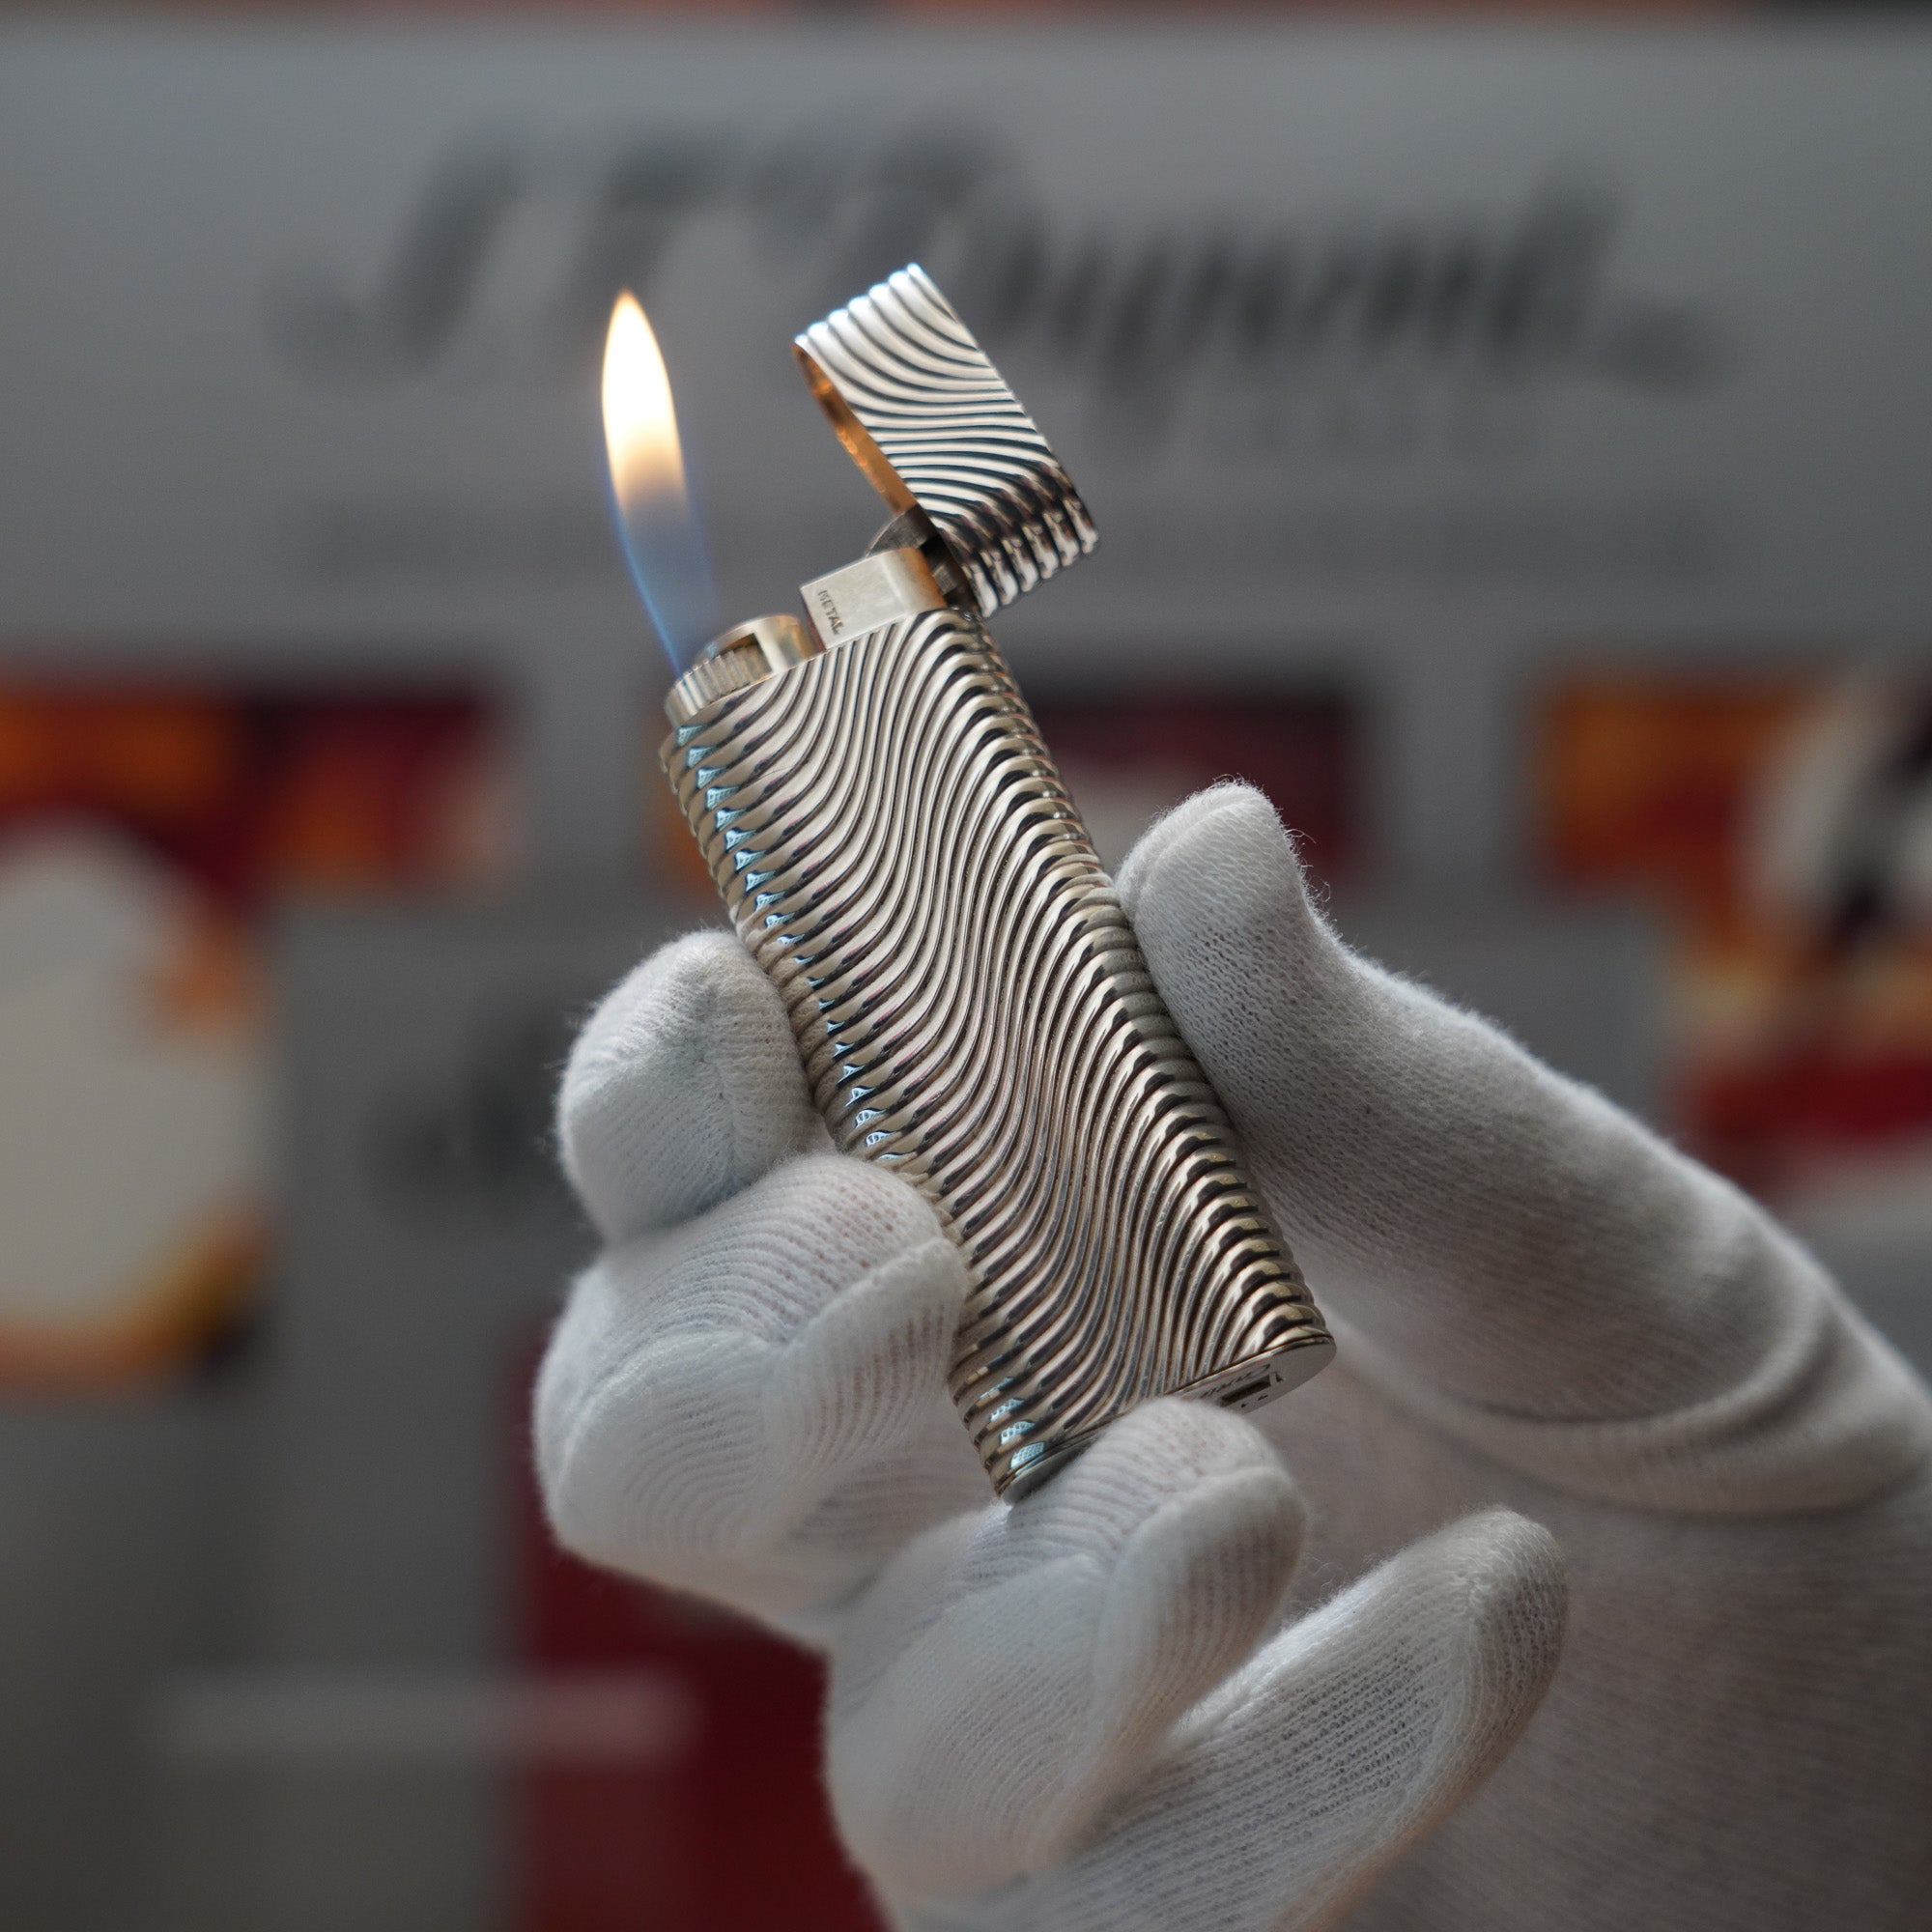 A person is holding up a Vintage 1980 Cartier Solid Silver 925 Lighter Factory Argent made of sterling silver.